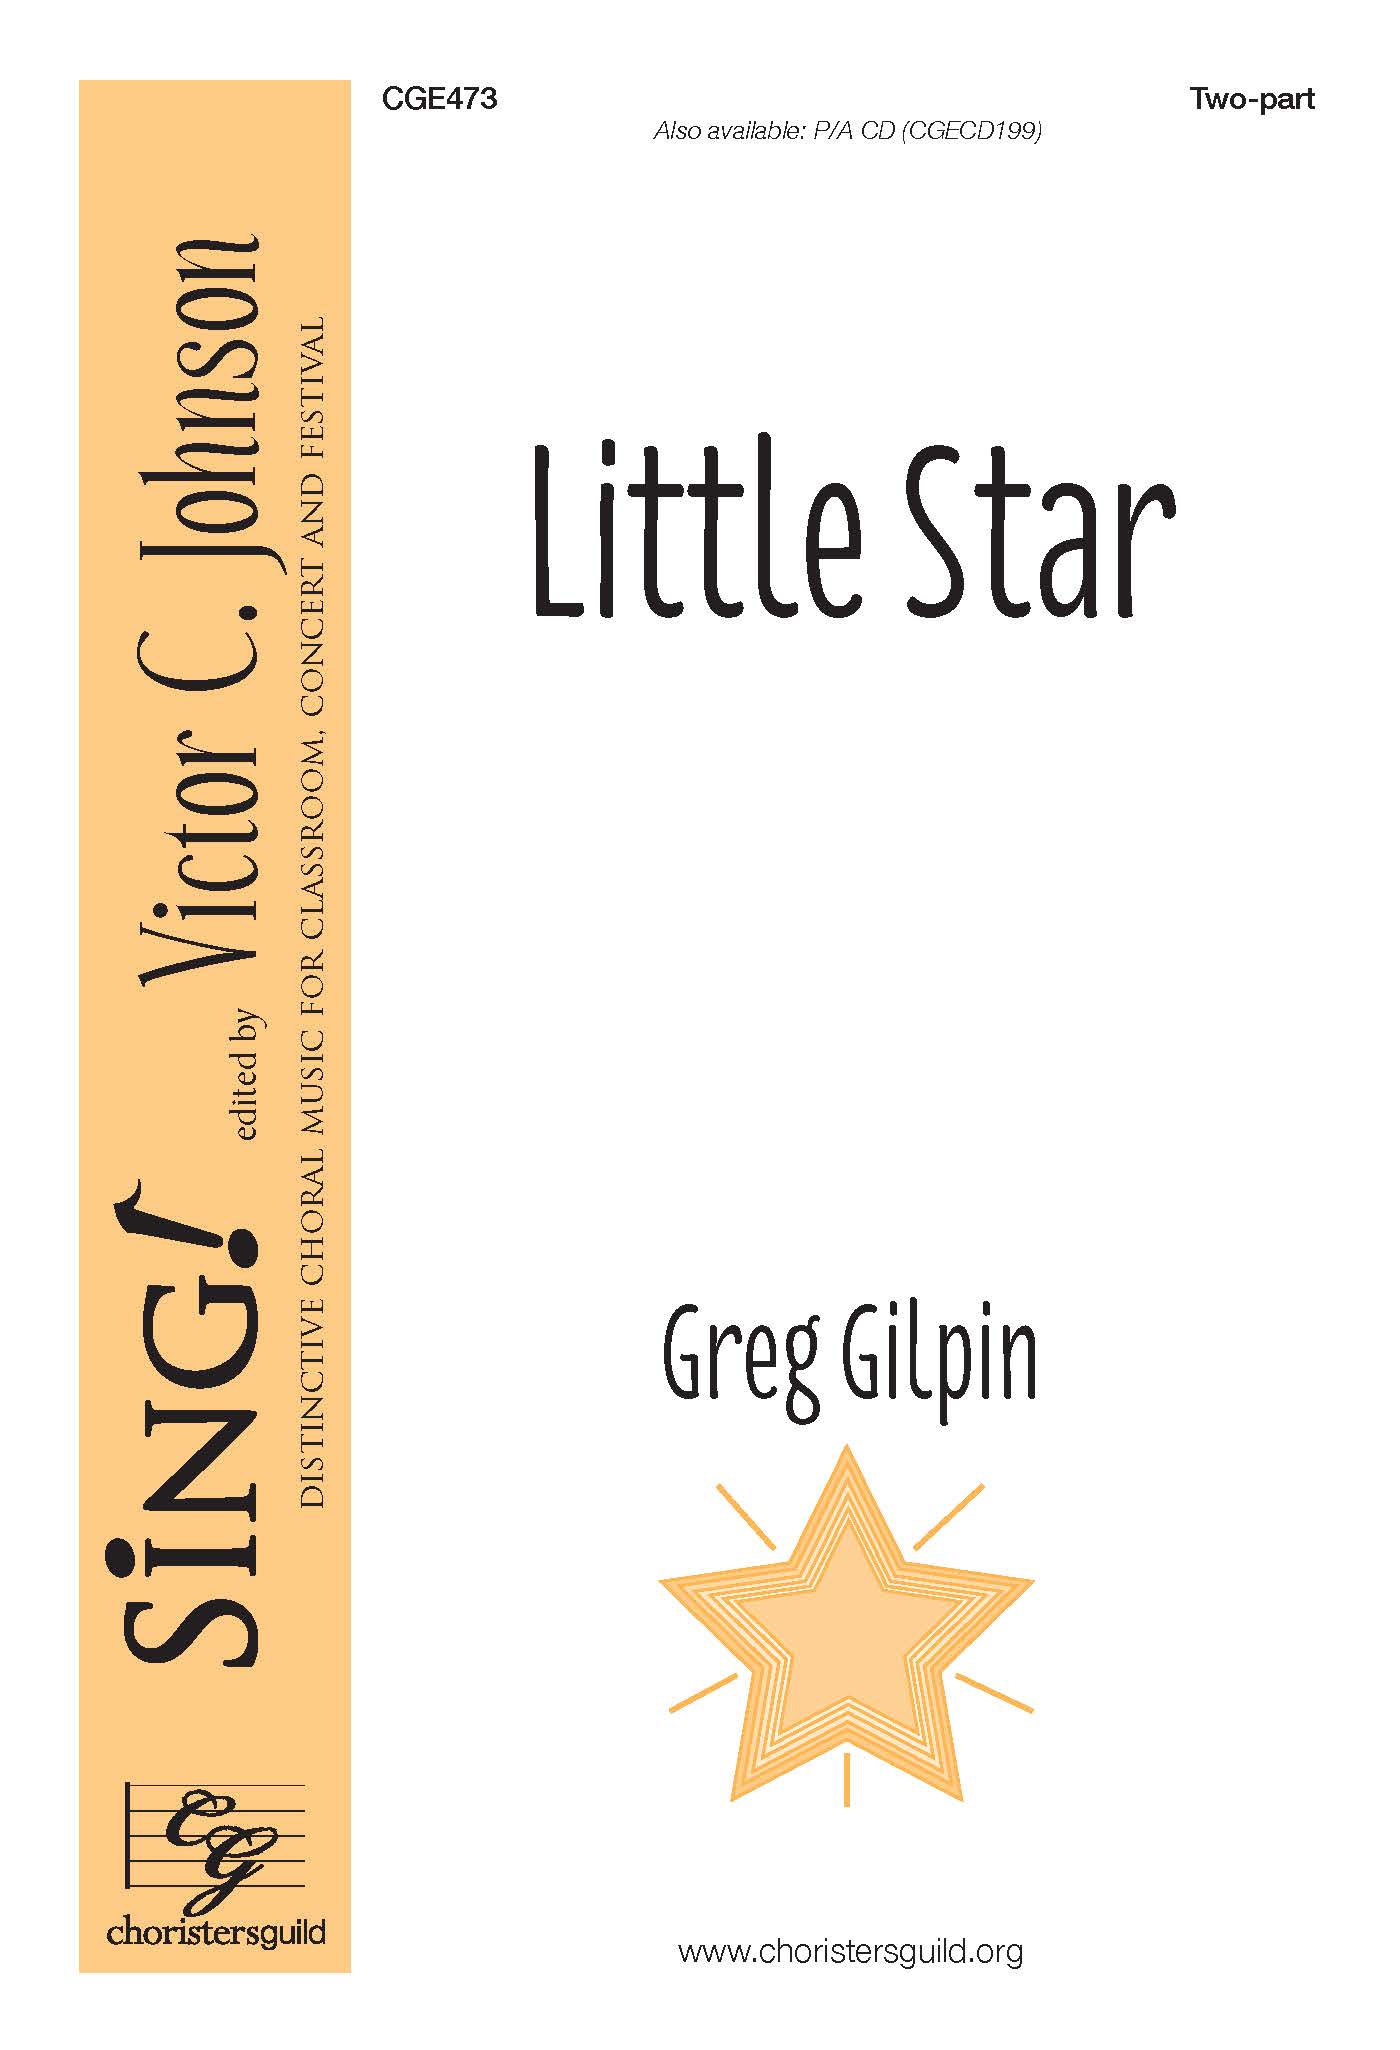 Little Star - Two-part